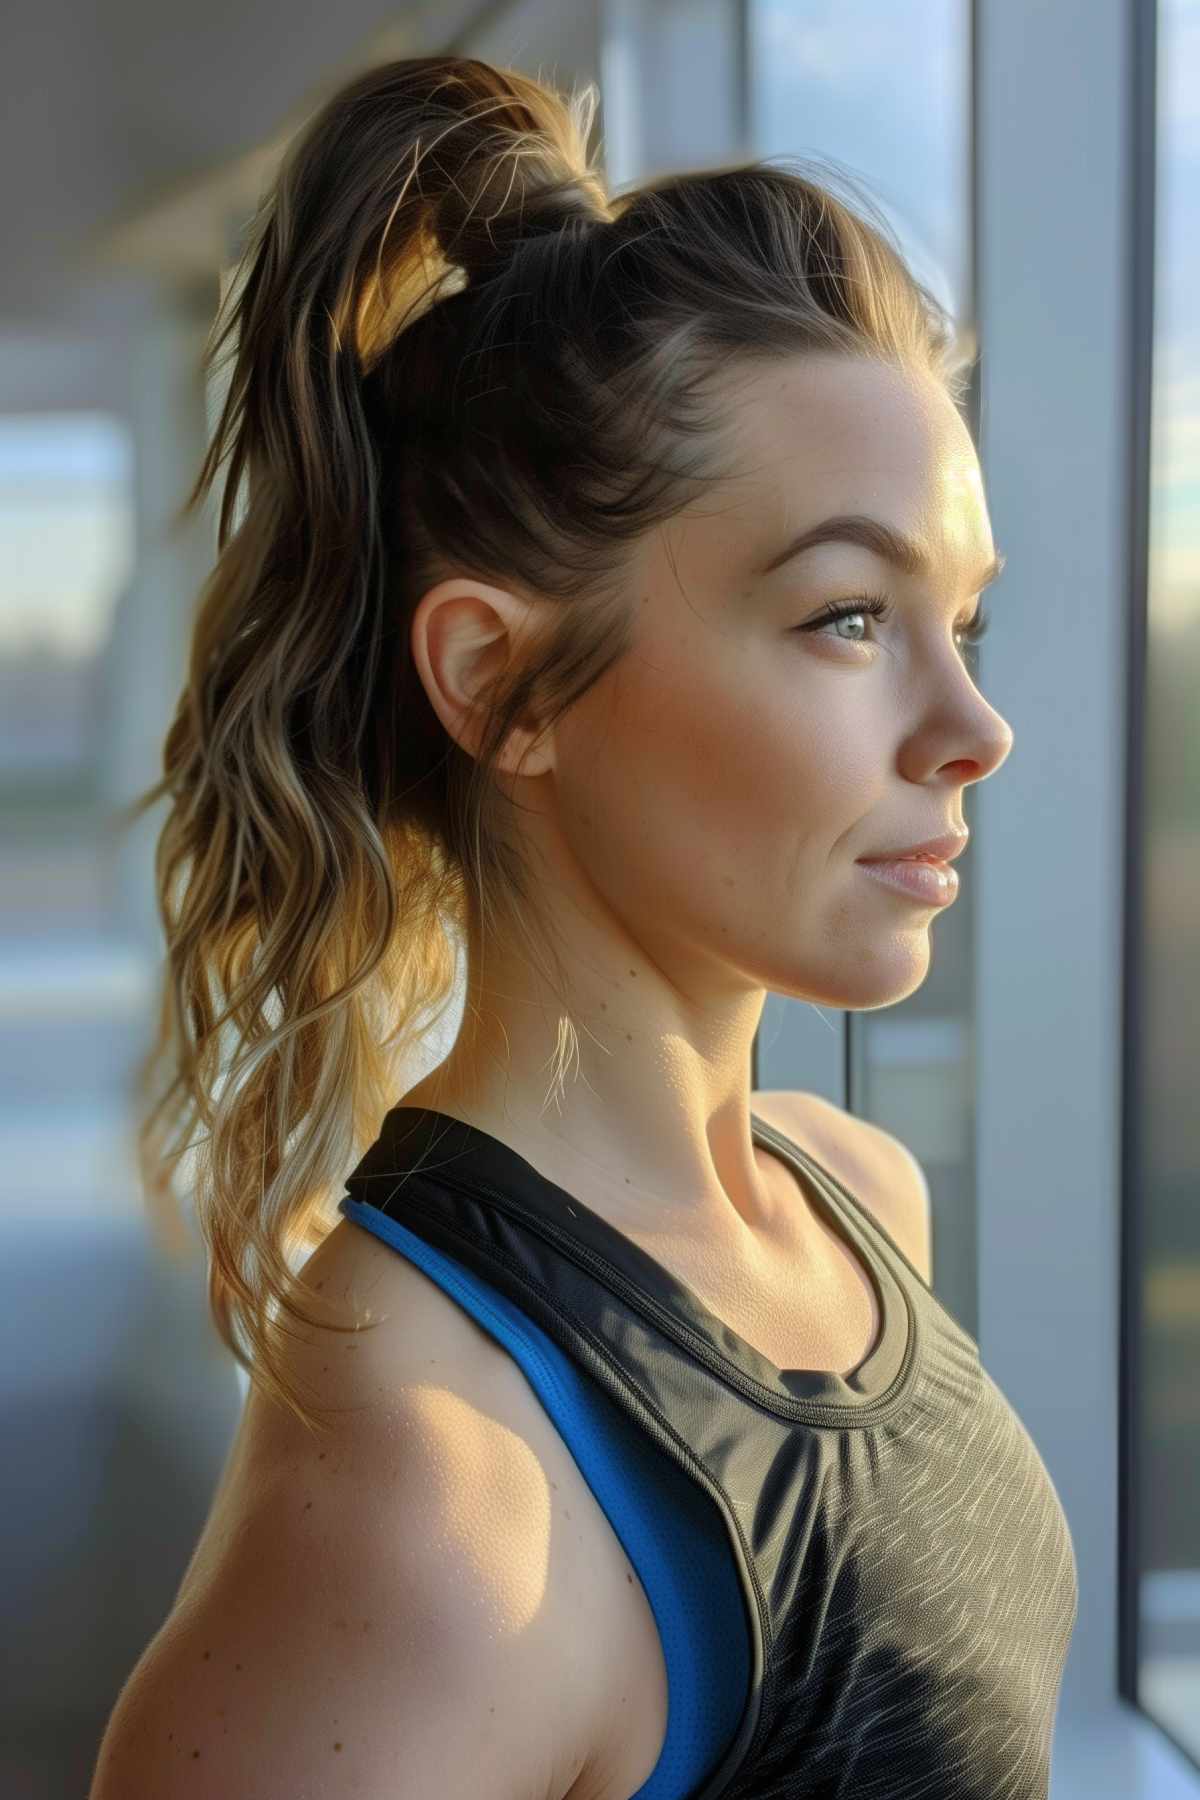 Sporty high ponytail with a creative twist at the base, featuring natural wavy hair, perfect for running and casual activities.